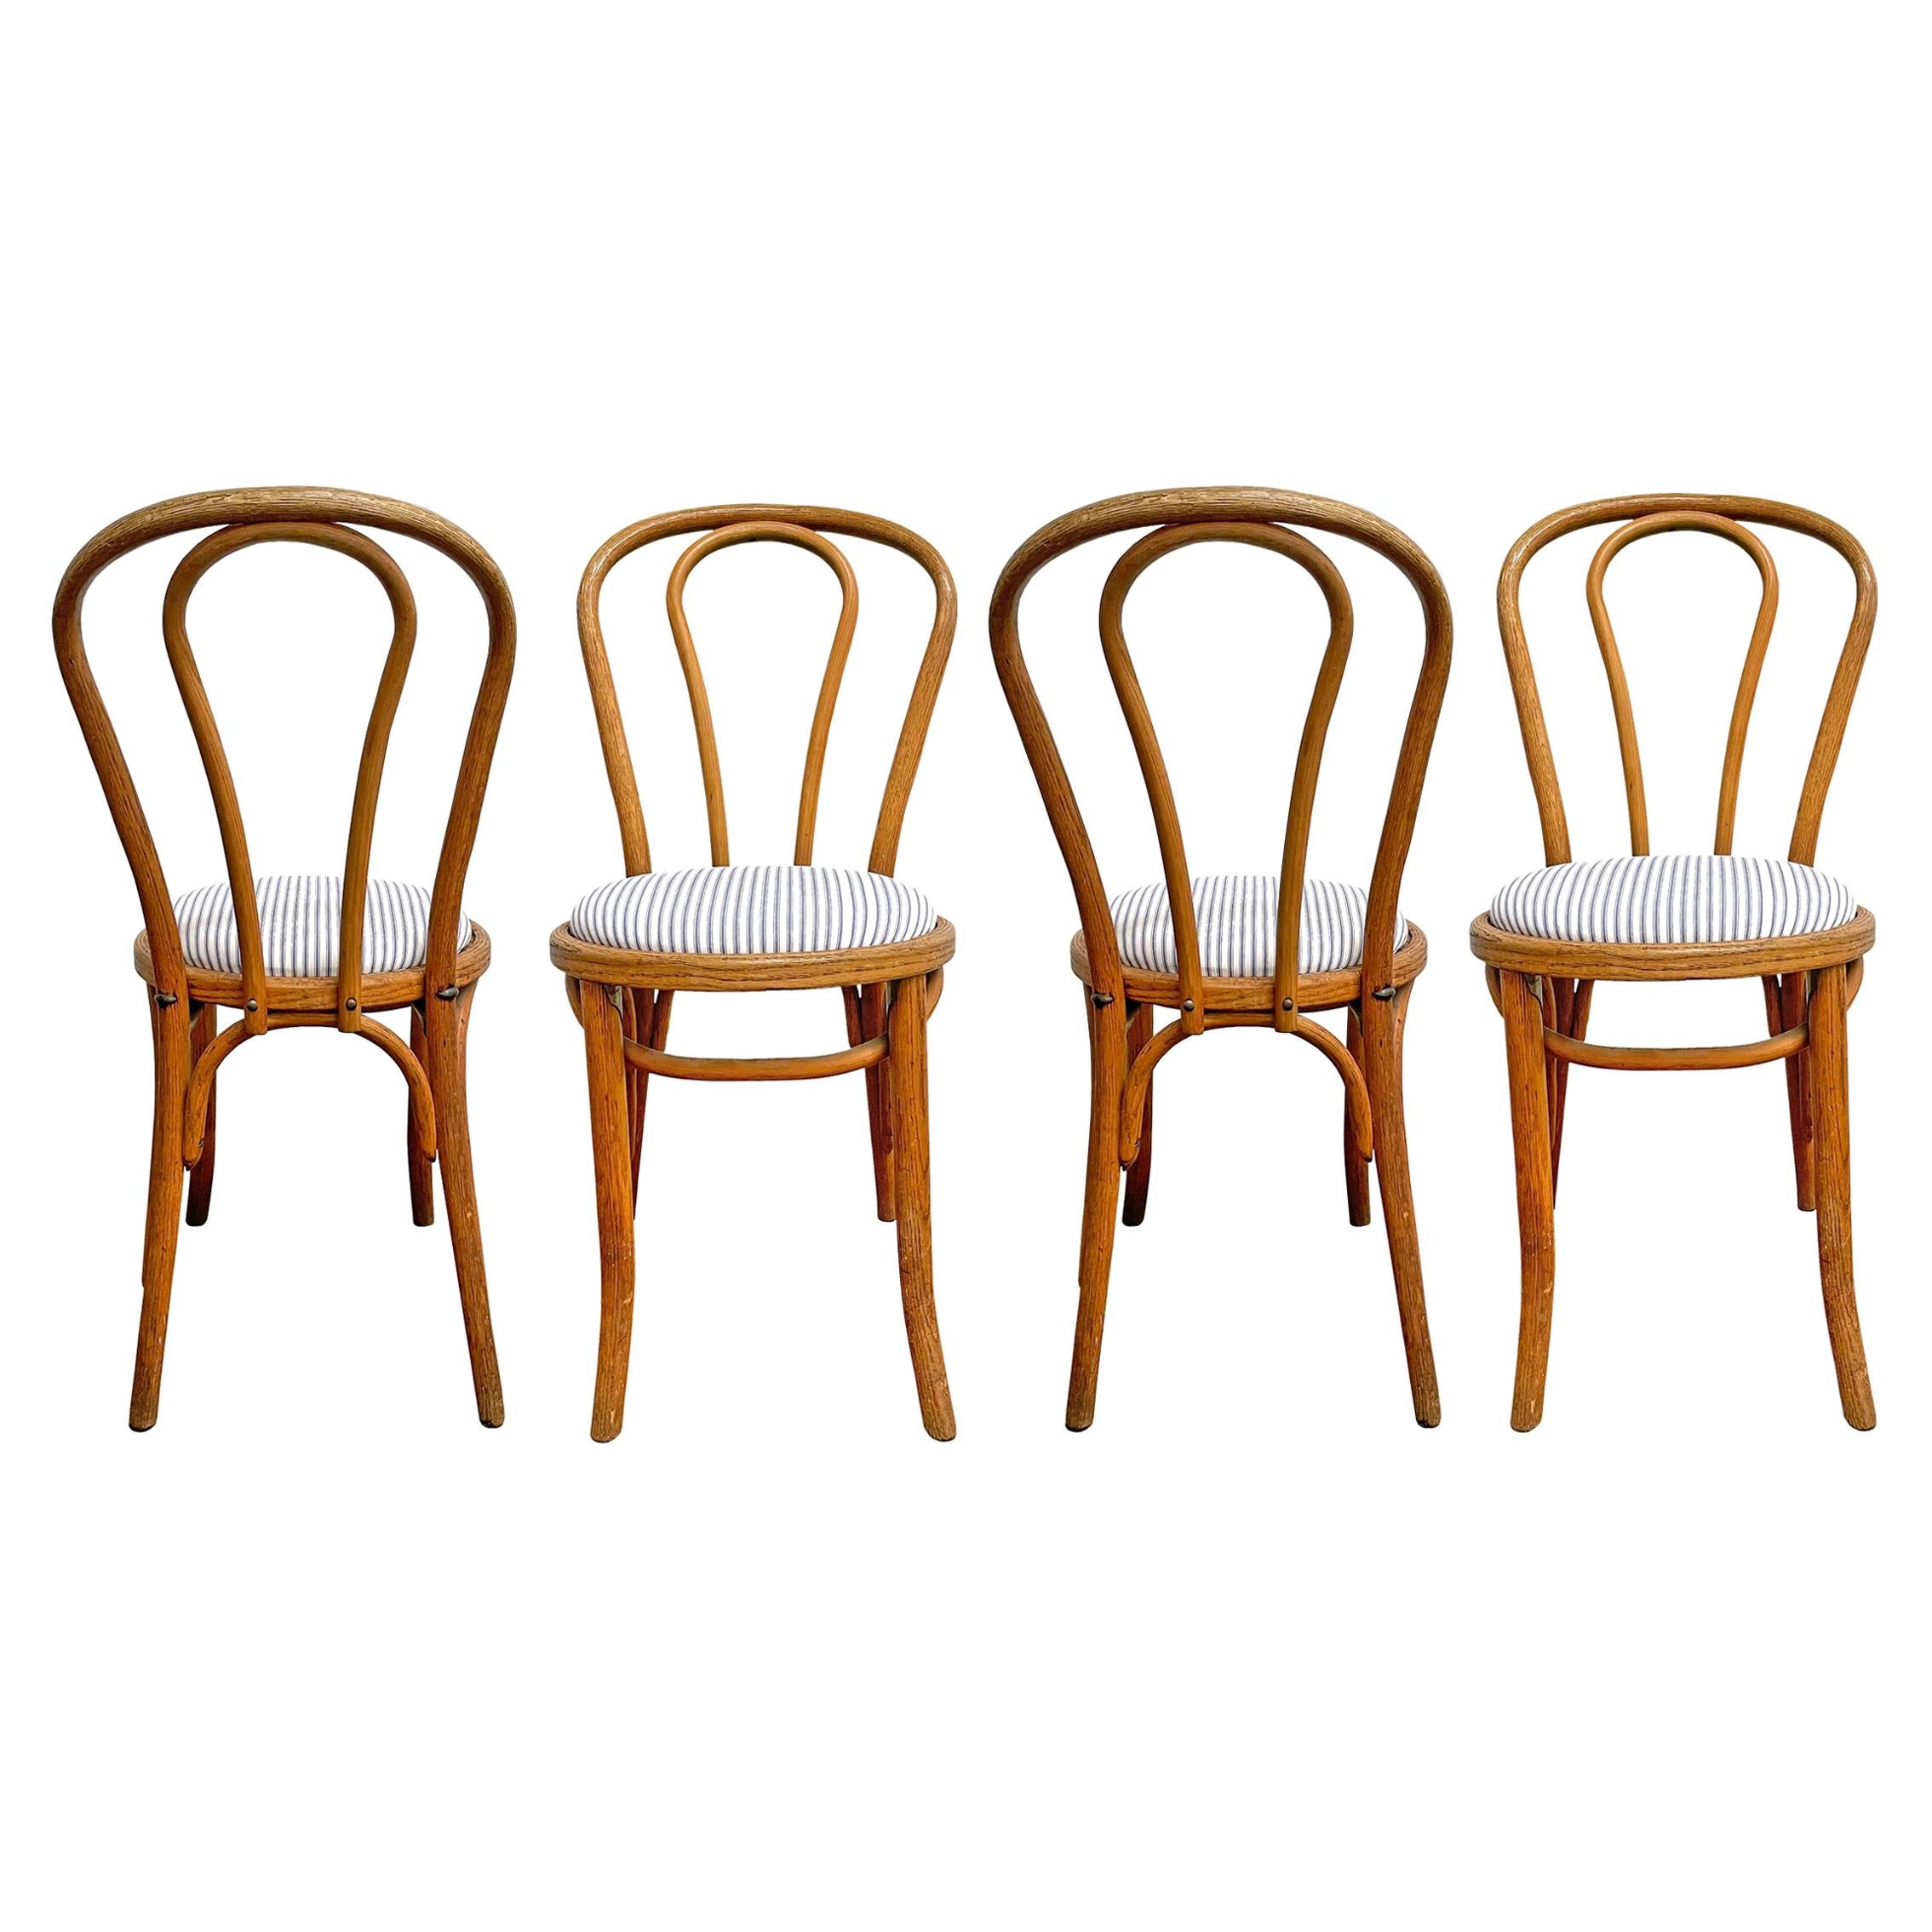 18 Thonet Chair - 8 For Sale on 1stDibs